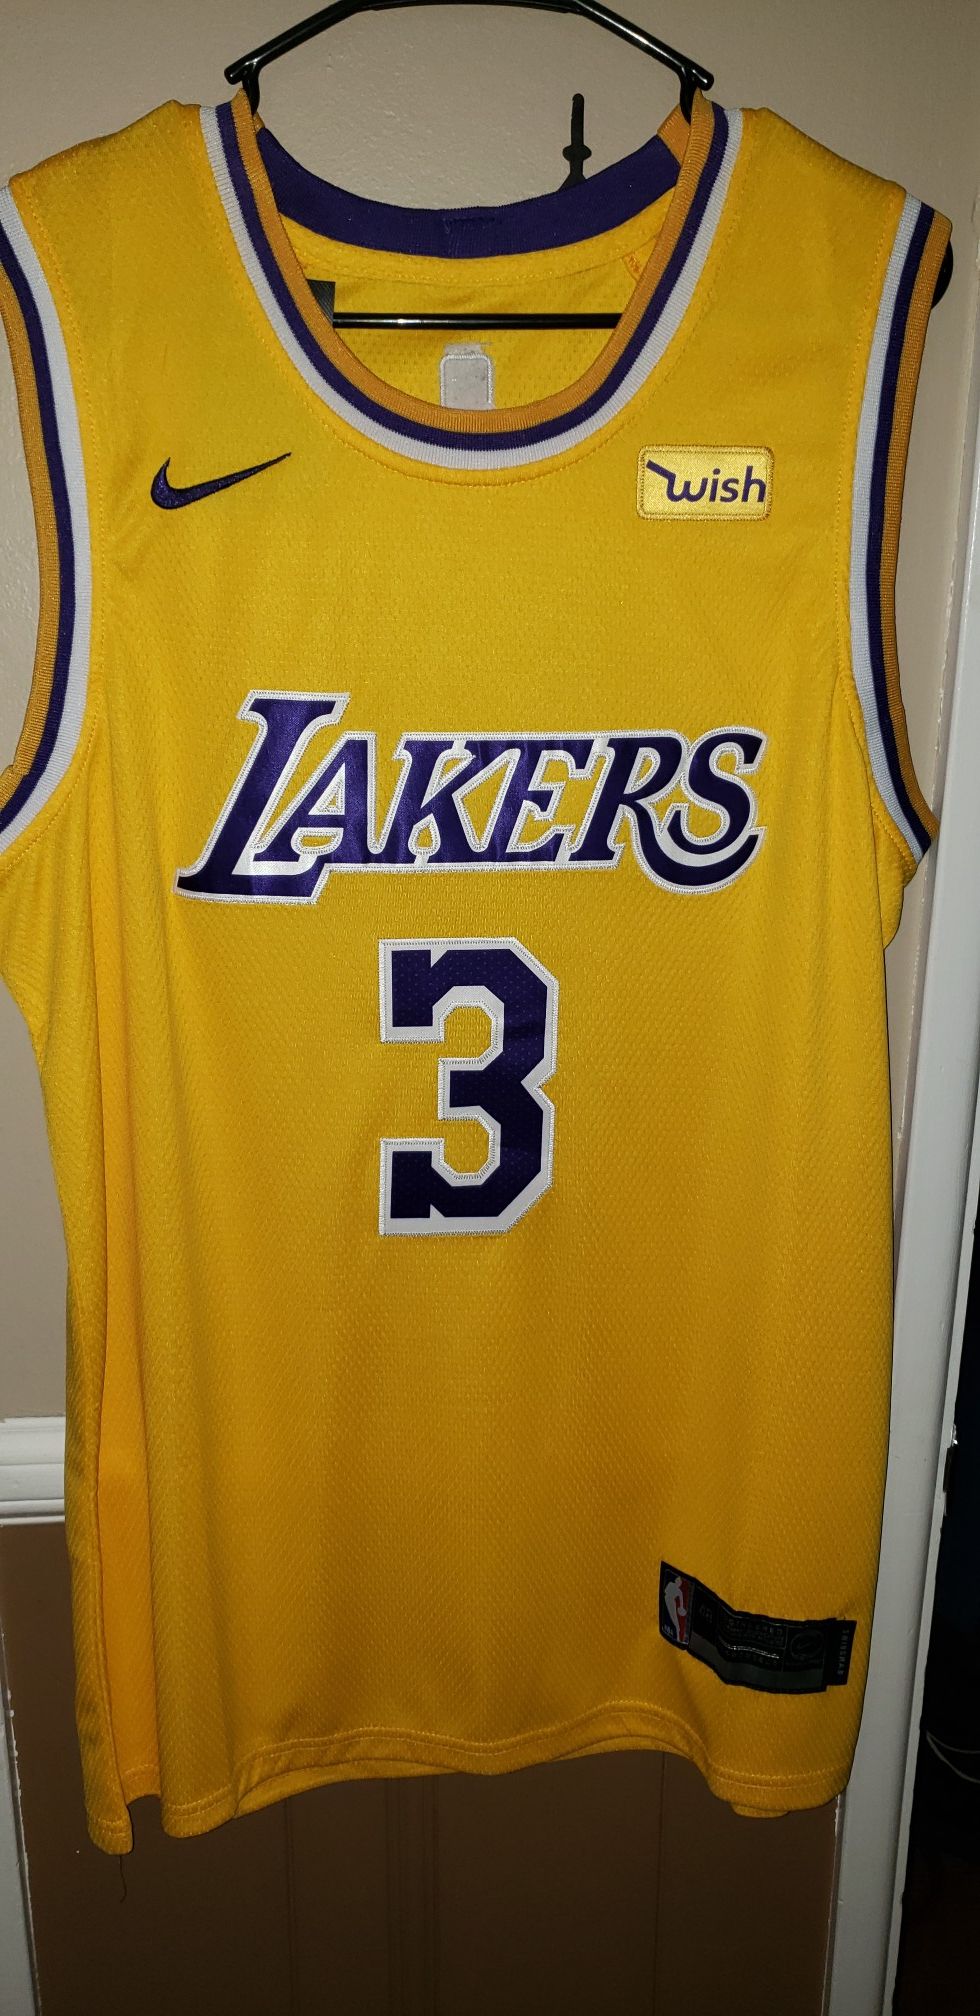 Men's Medium Anthony Davis Los Angeles Lakers Jersey New with Tags Stiched Nike $45. Ships ,+$3. Pick up in West Covina